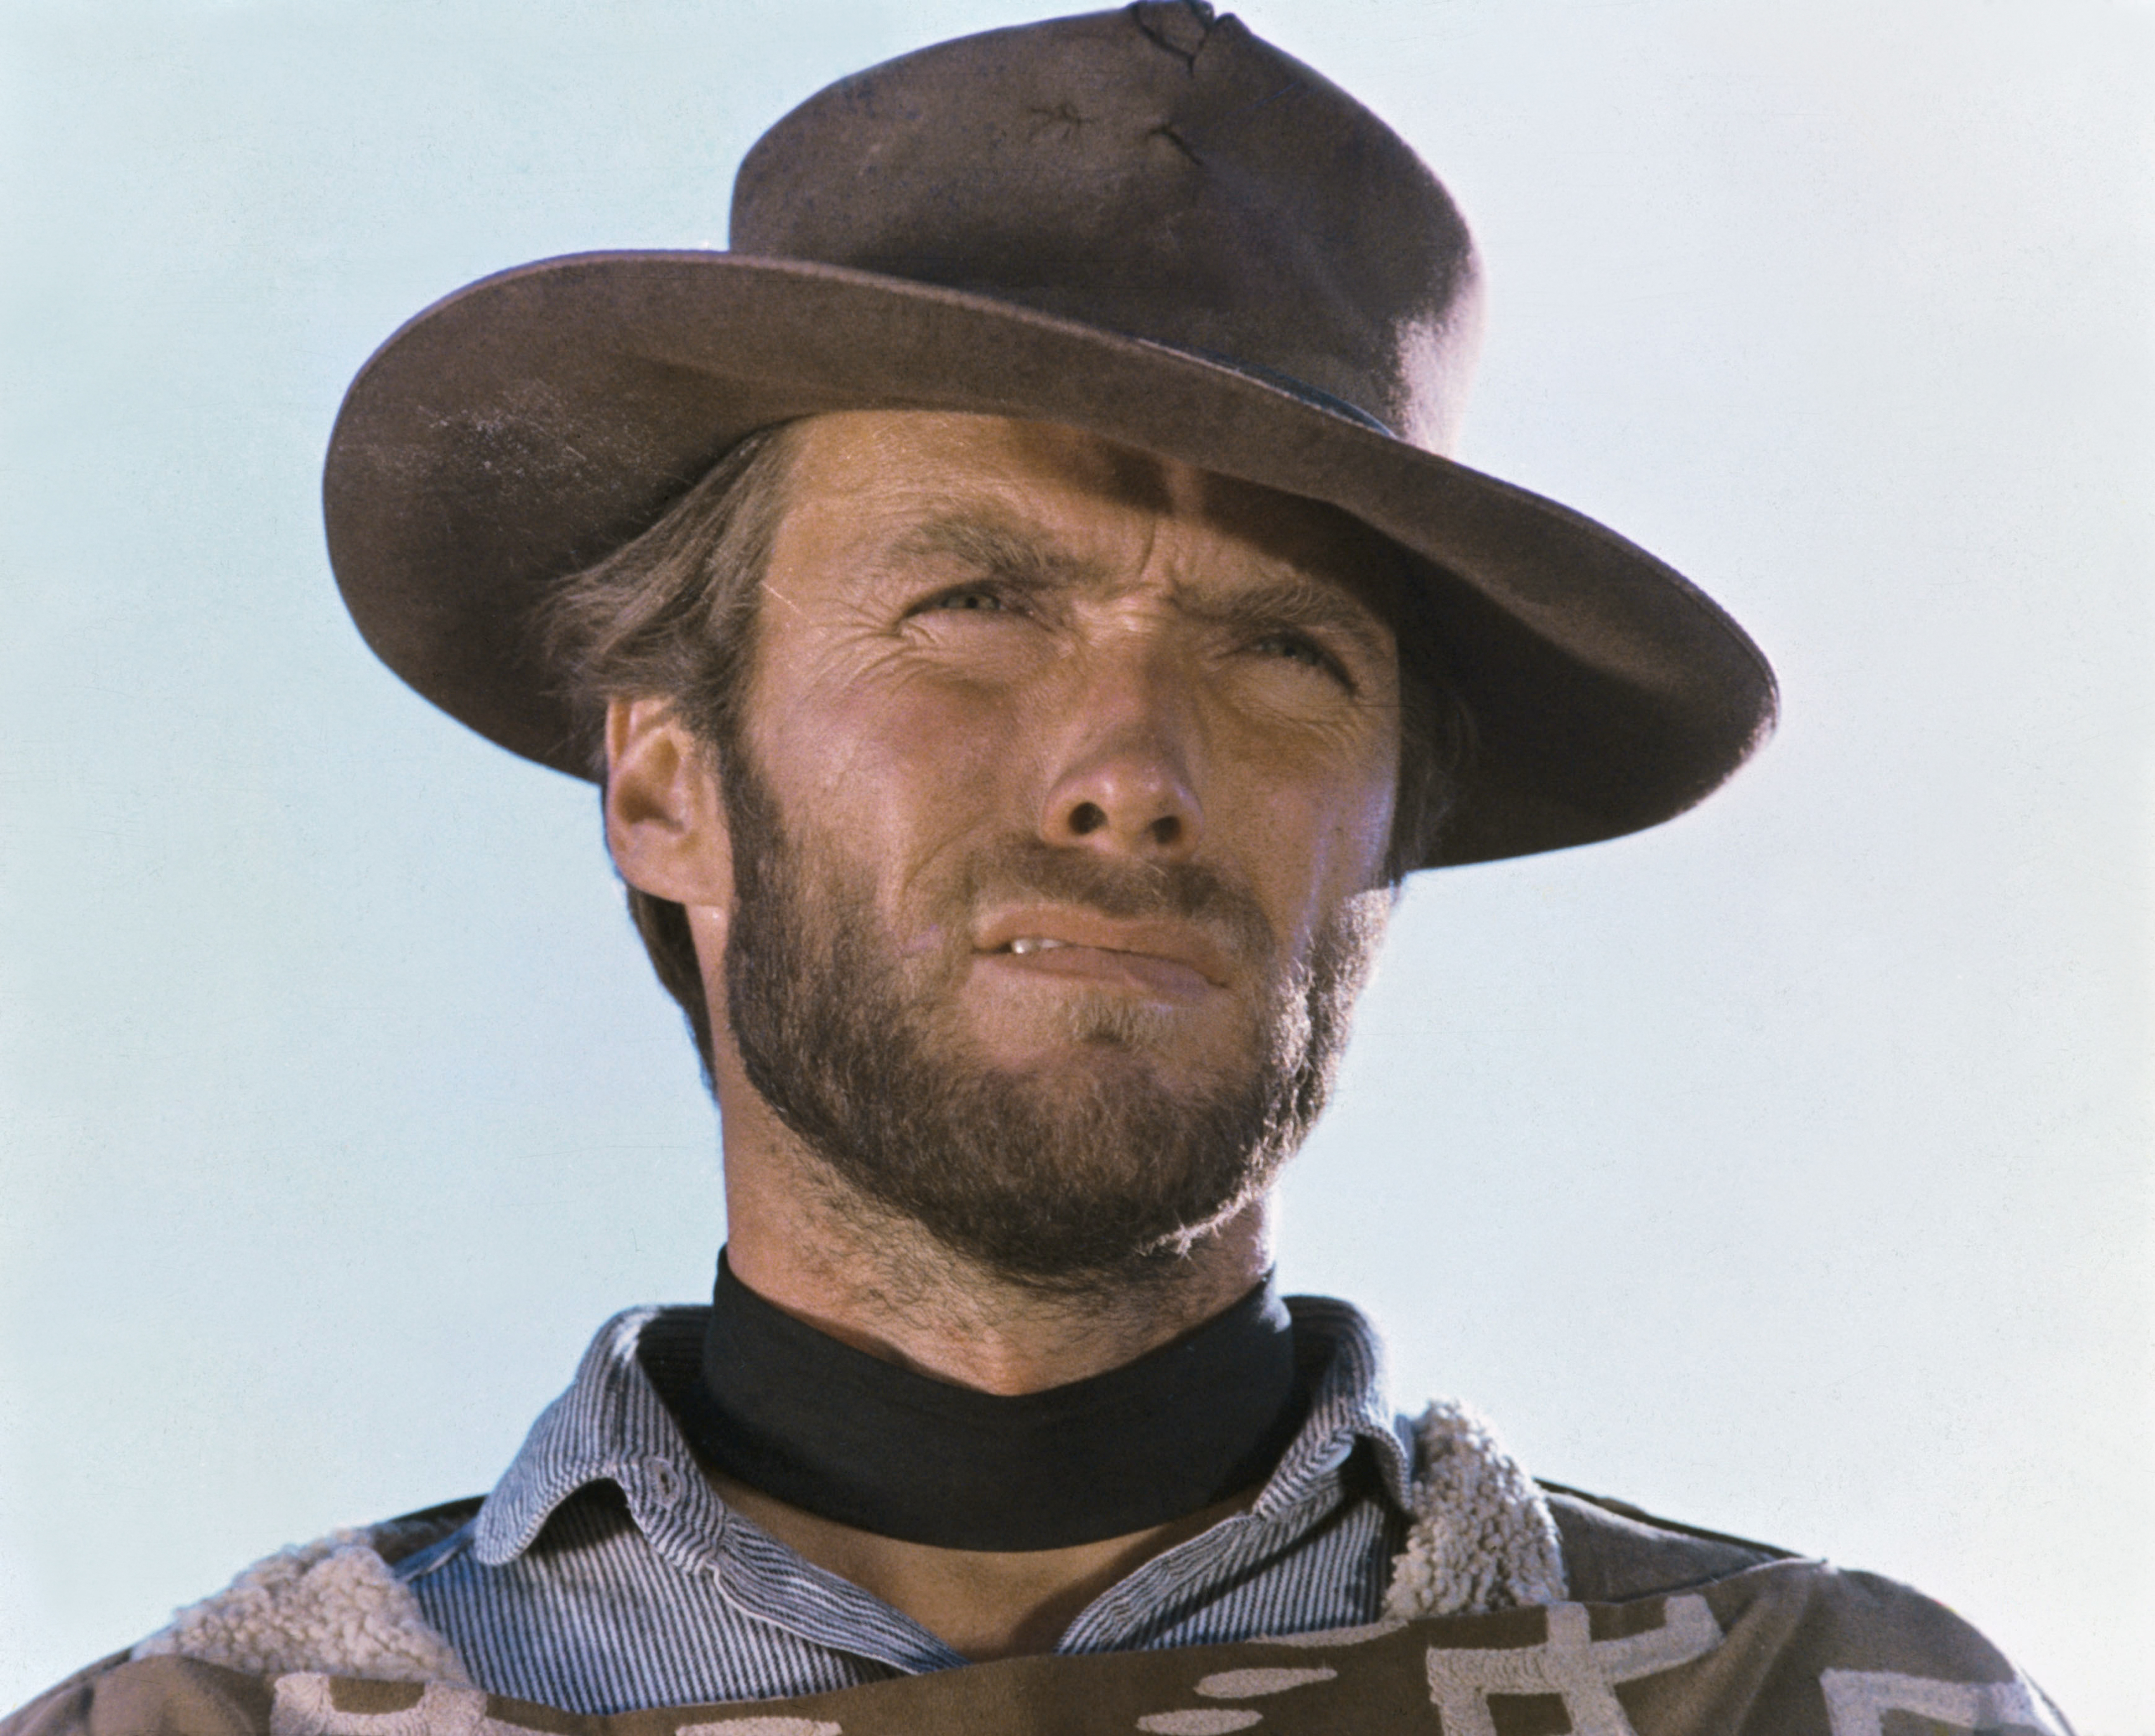 Clint Eastwood am Set von "The Good, The Bad and The Ugly" im Jahr 1966 | Quelle: Getty Images